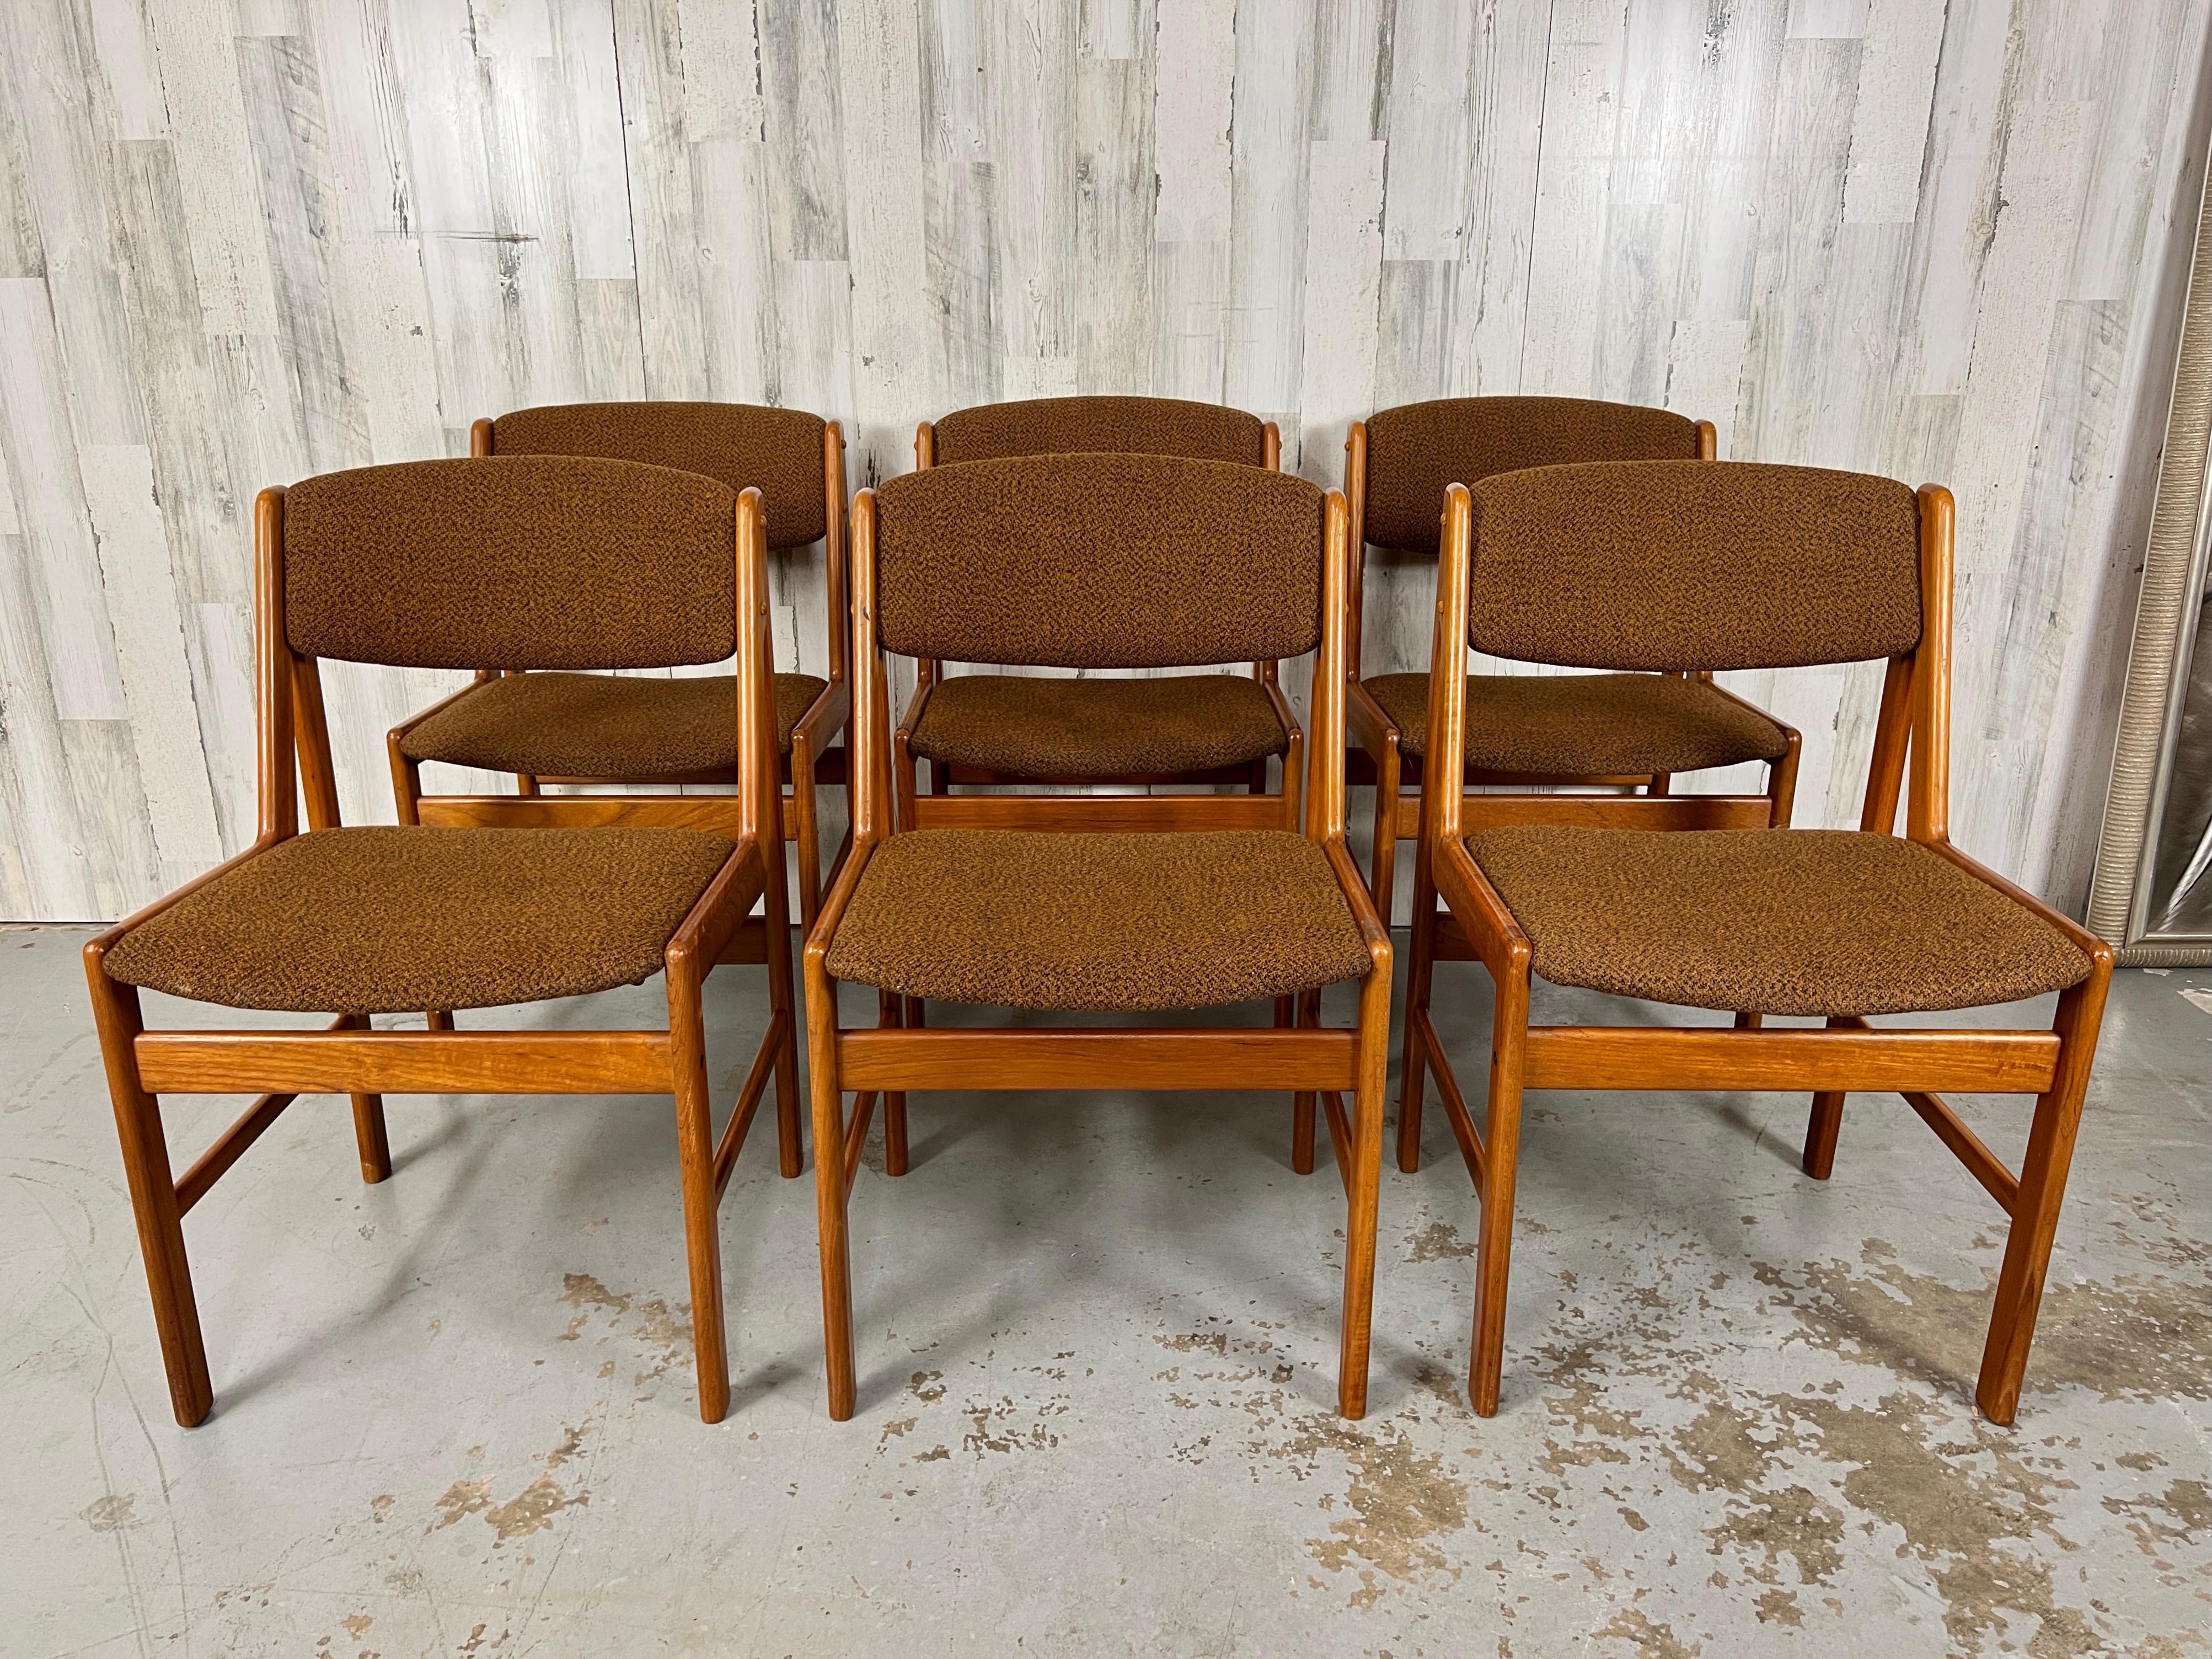 Set of six teak dining chairs by Artfurn company of Denmark with sculptual v-shaped frames.